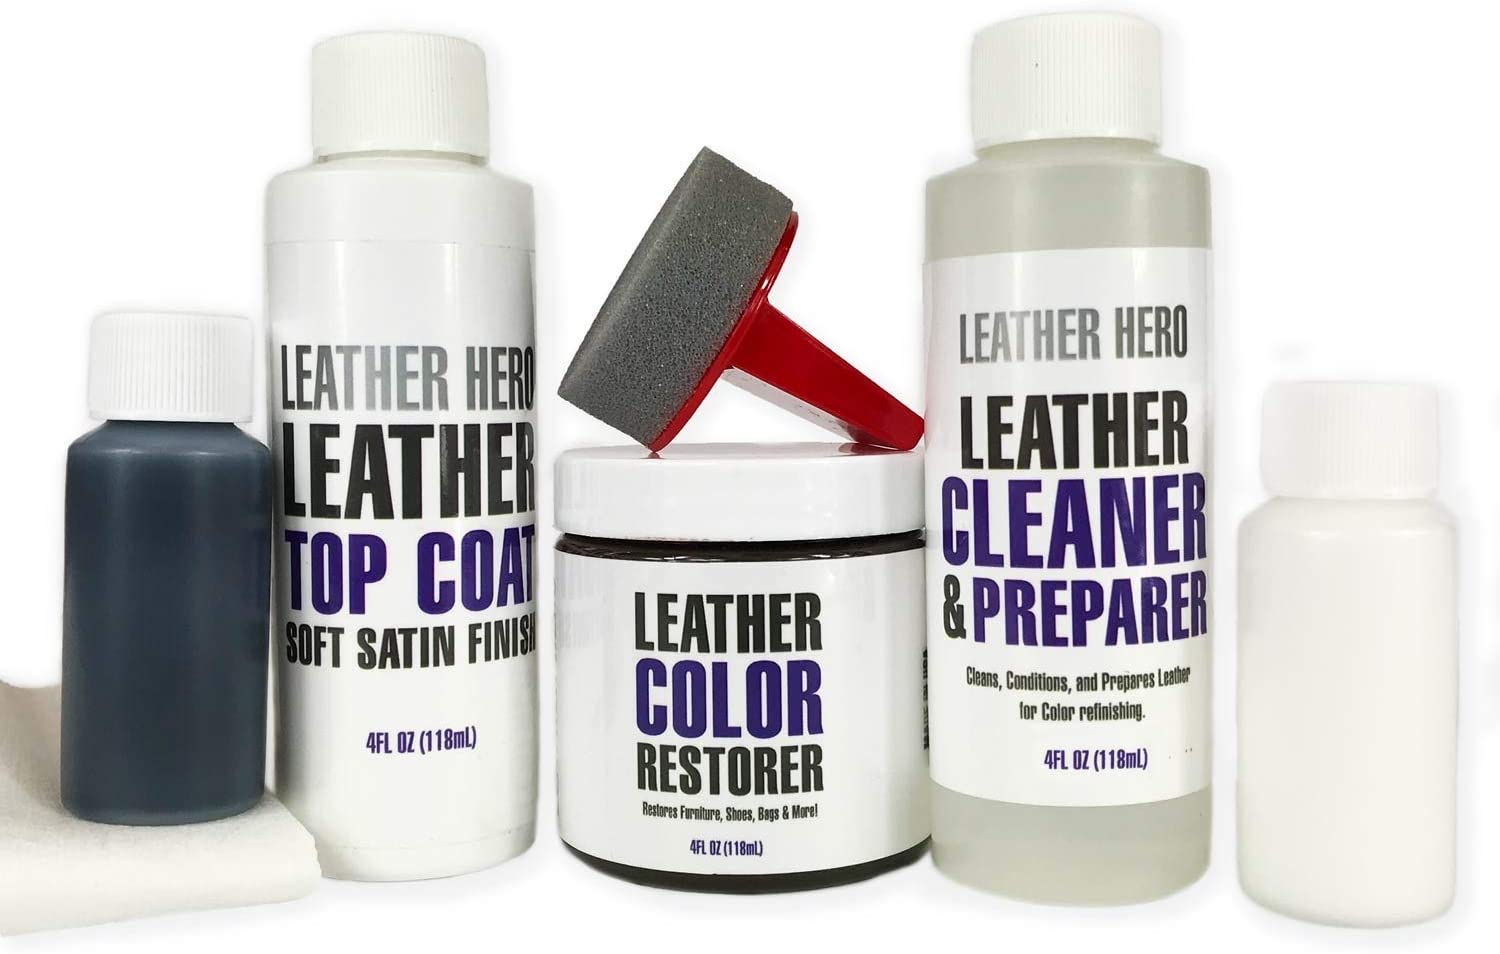  Leather Hero Leather Color Restorer for Couches